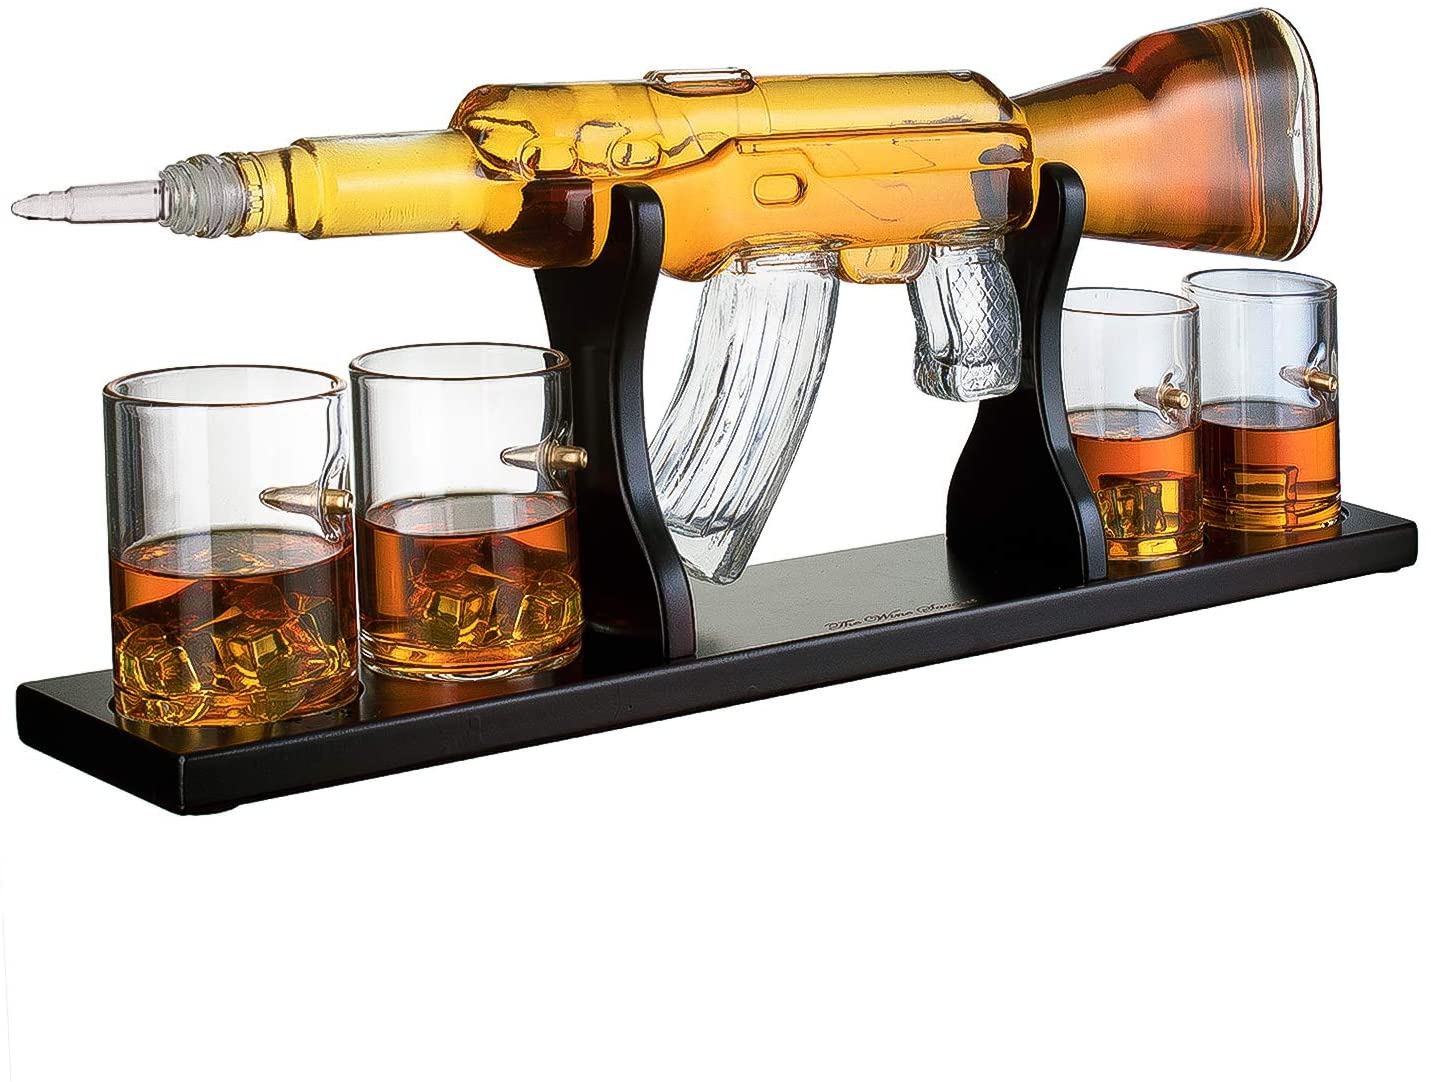 AK47-Shaped Glass Whiskey Decanter - Weird gifts for dad